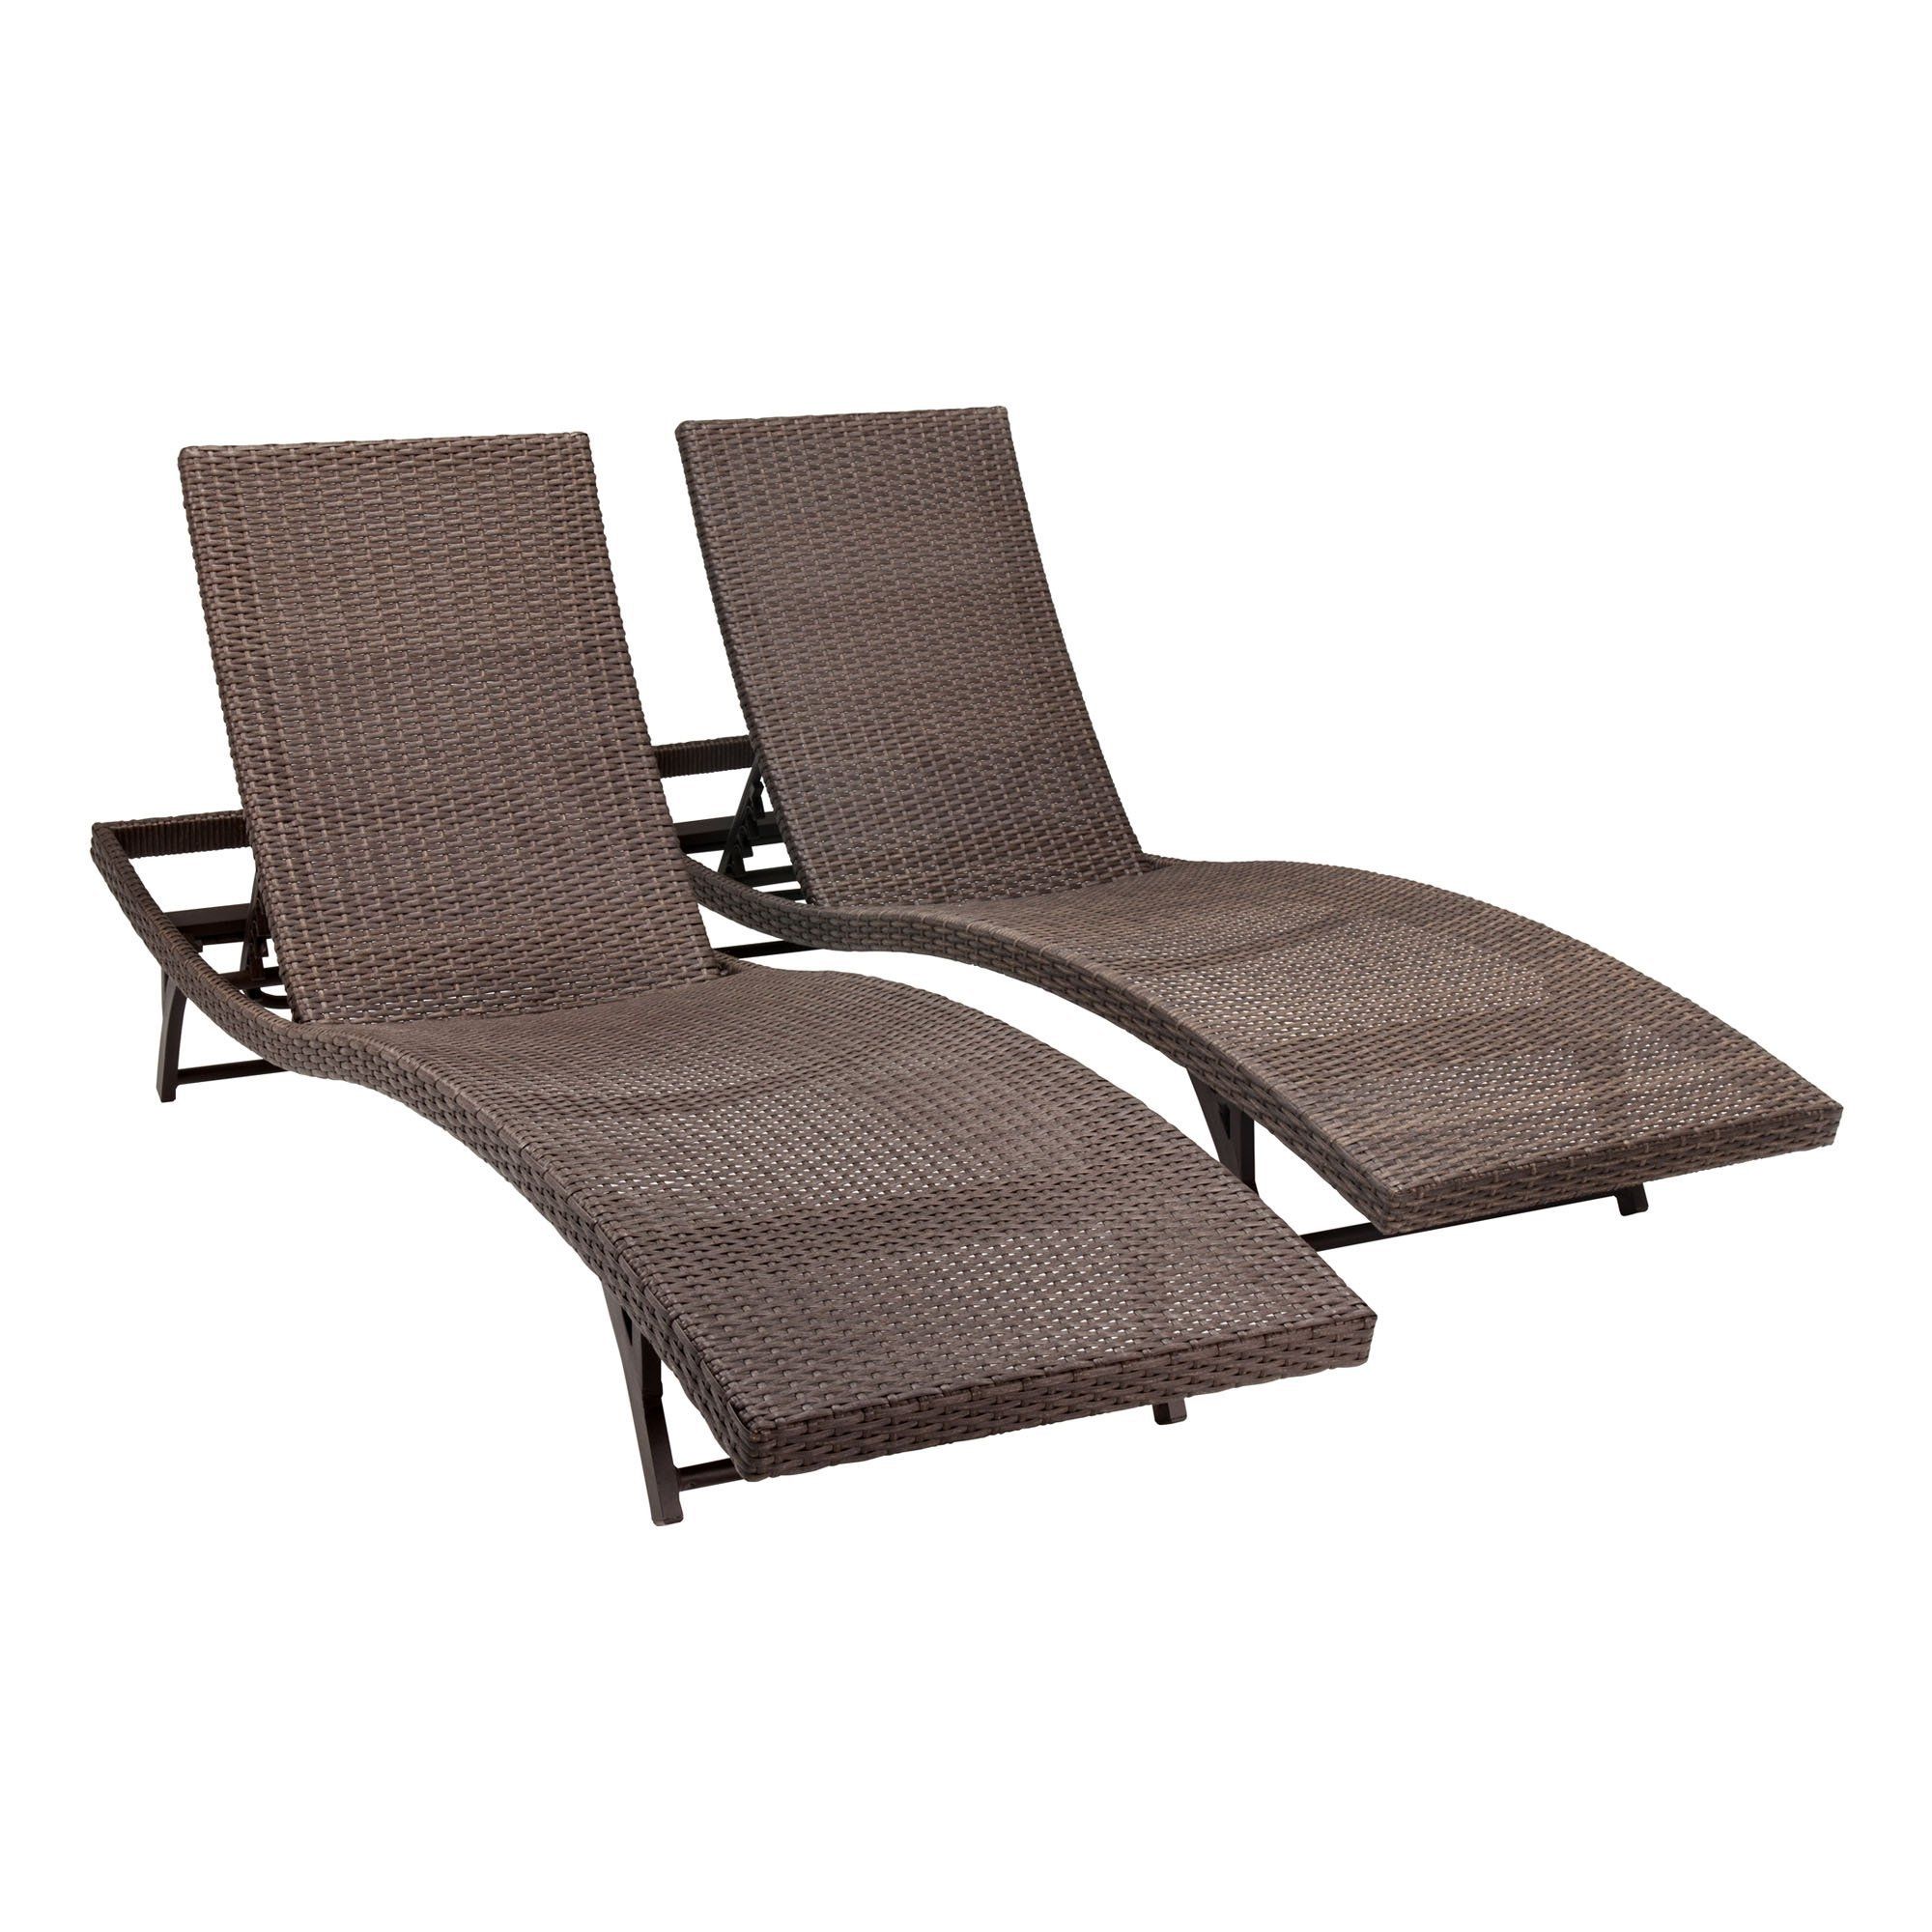 Favorite Outdoor : Cheap Lounge Chairs Patio Furniture Chaise Lounge White Within Cheap Outdoor Chaise Lounge Chairs (View 15 of 15)